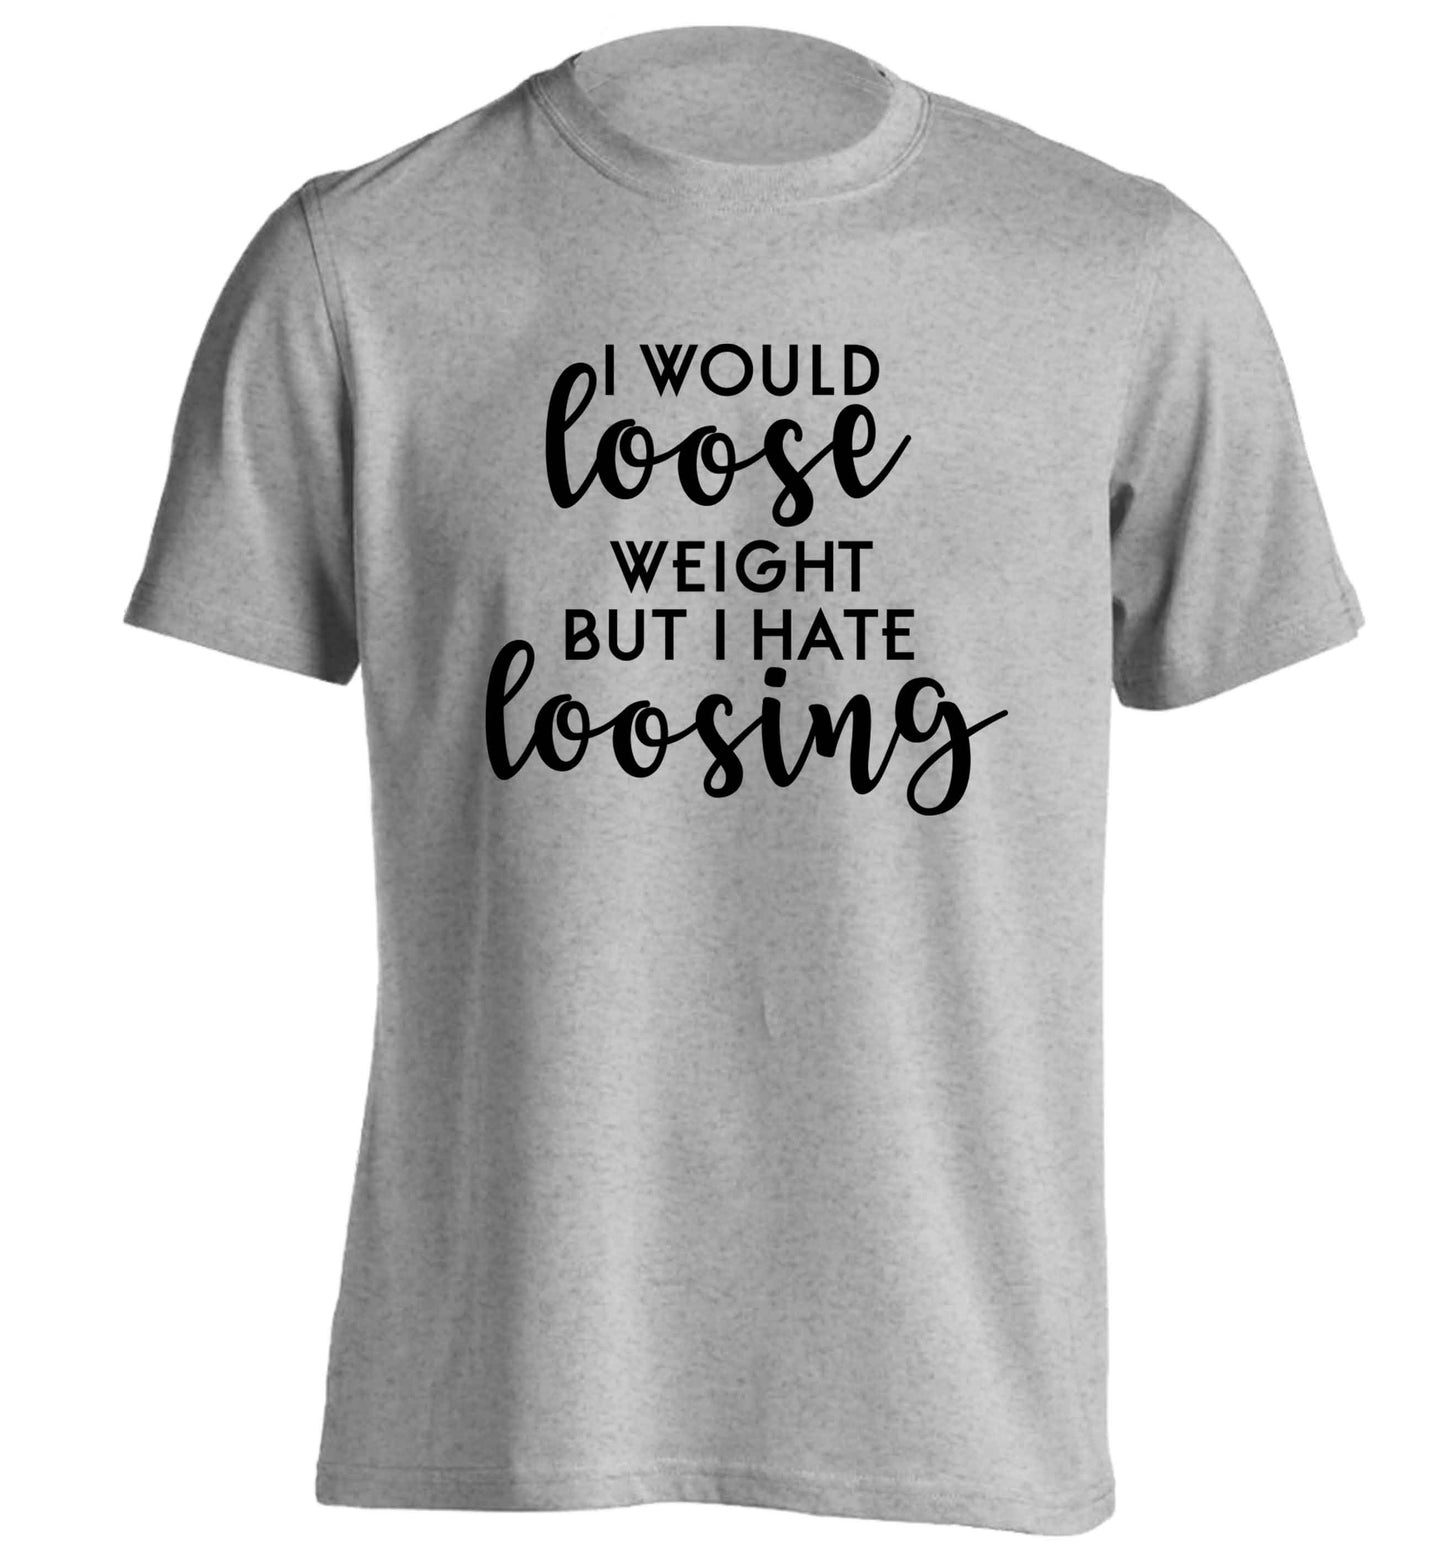 I would loose weight but I hate loosing adults unisex grey Tshirt 2XL